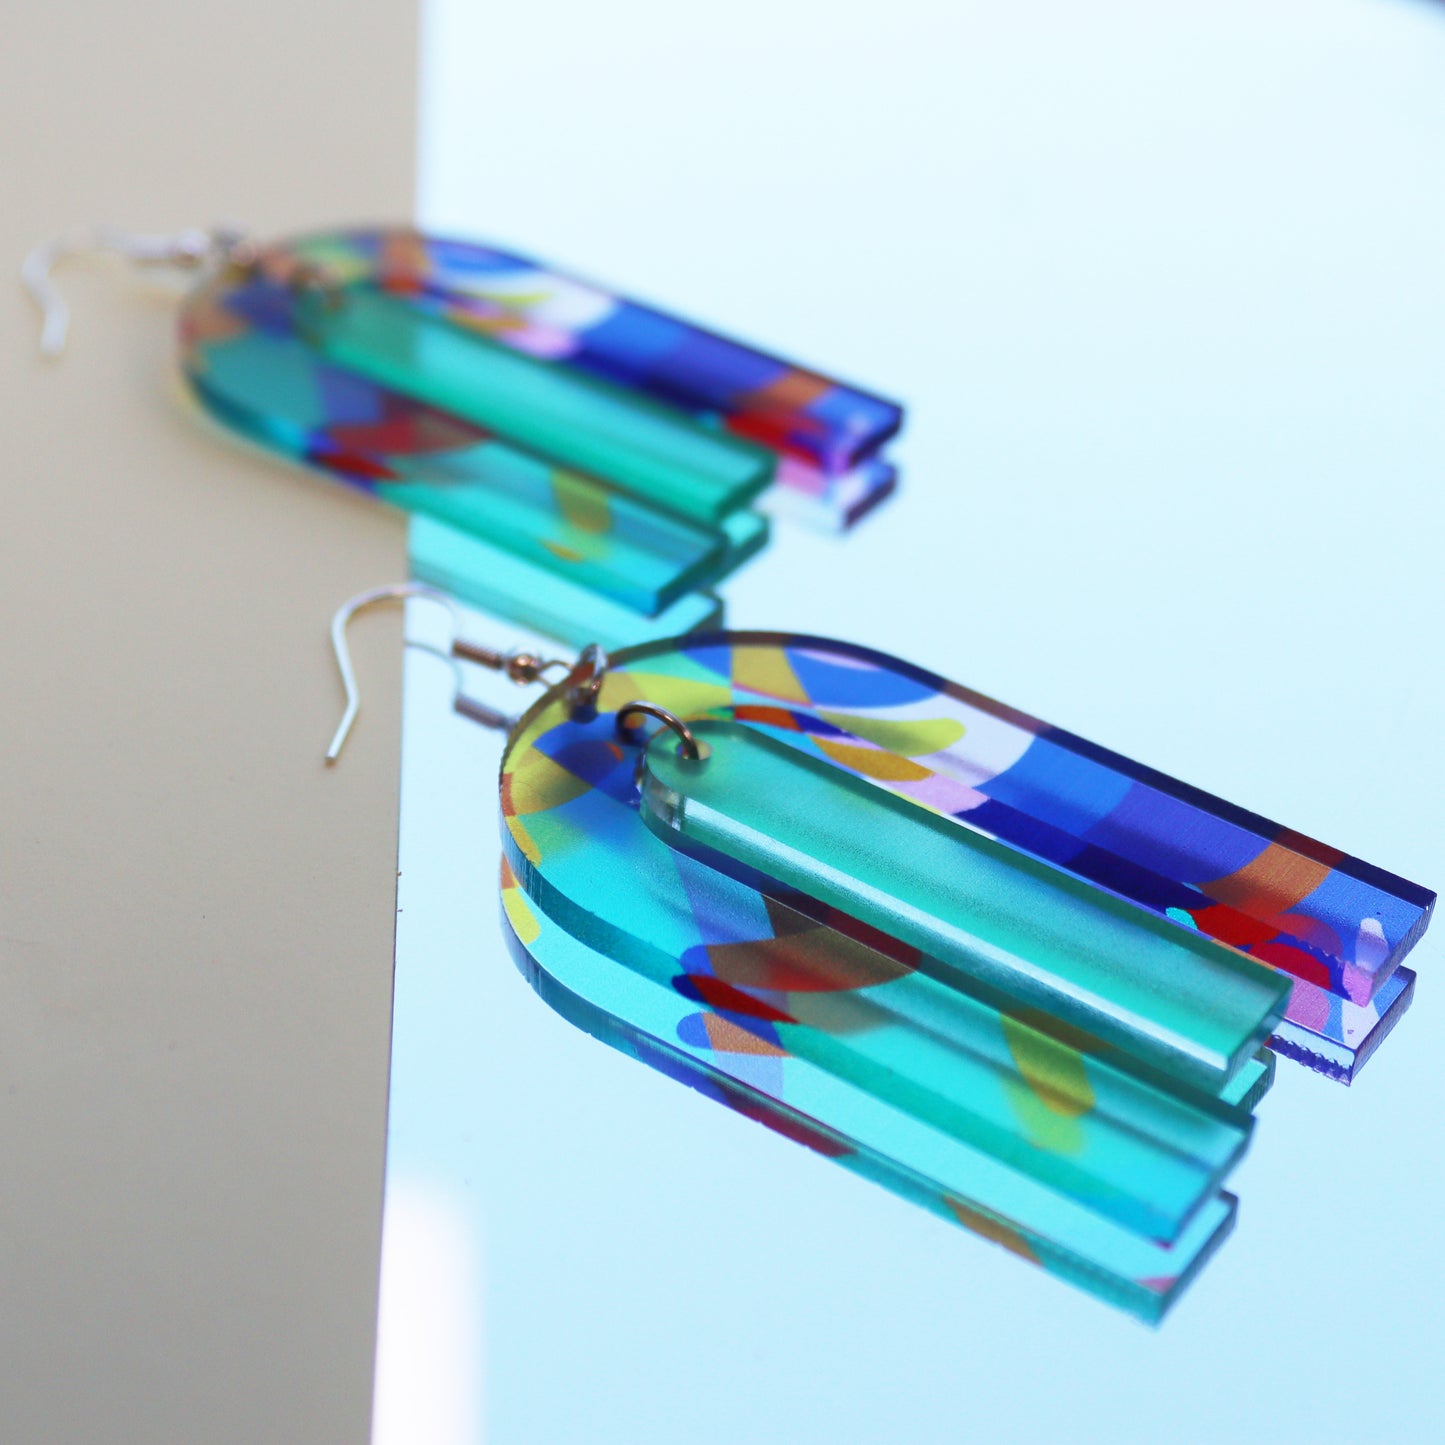 modern large arch shape geometric shape printed acrylic statement earrings shown on backing card